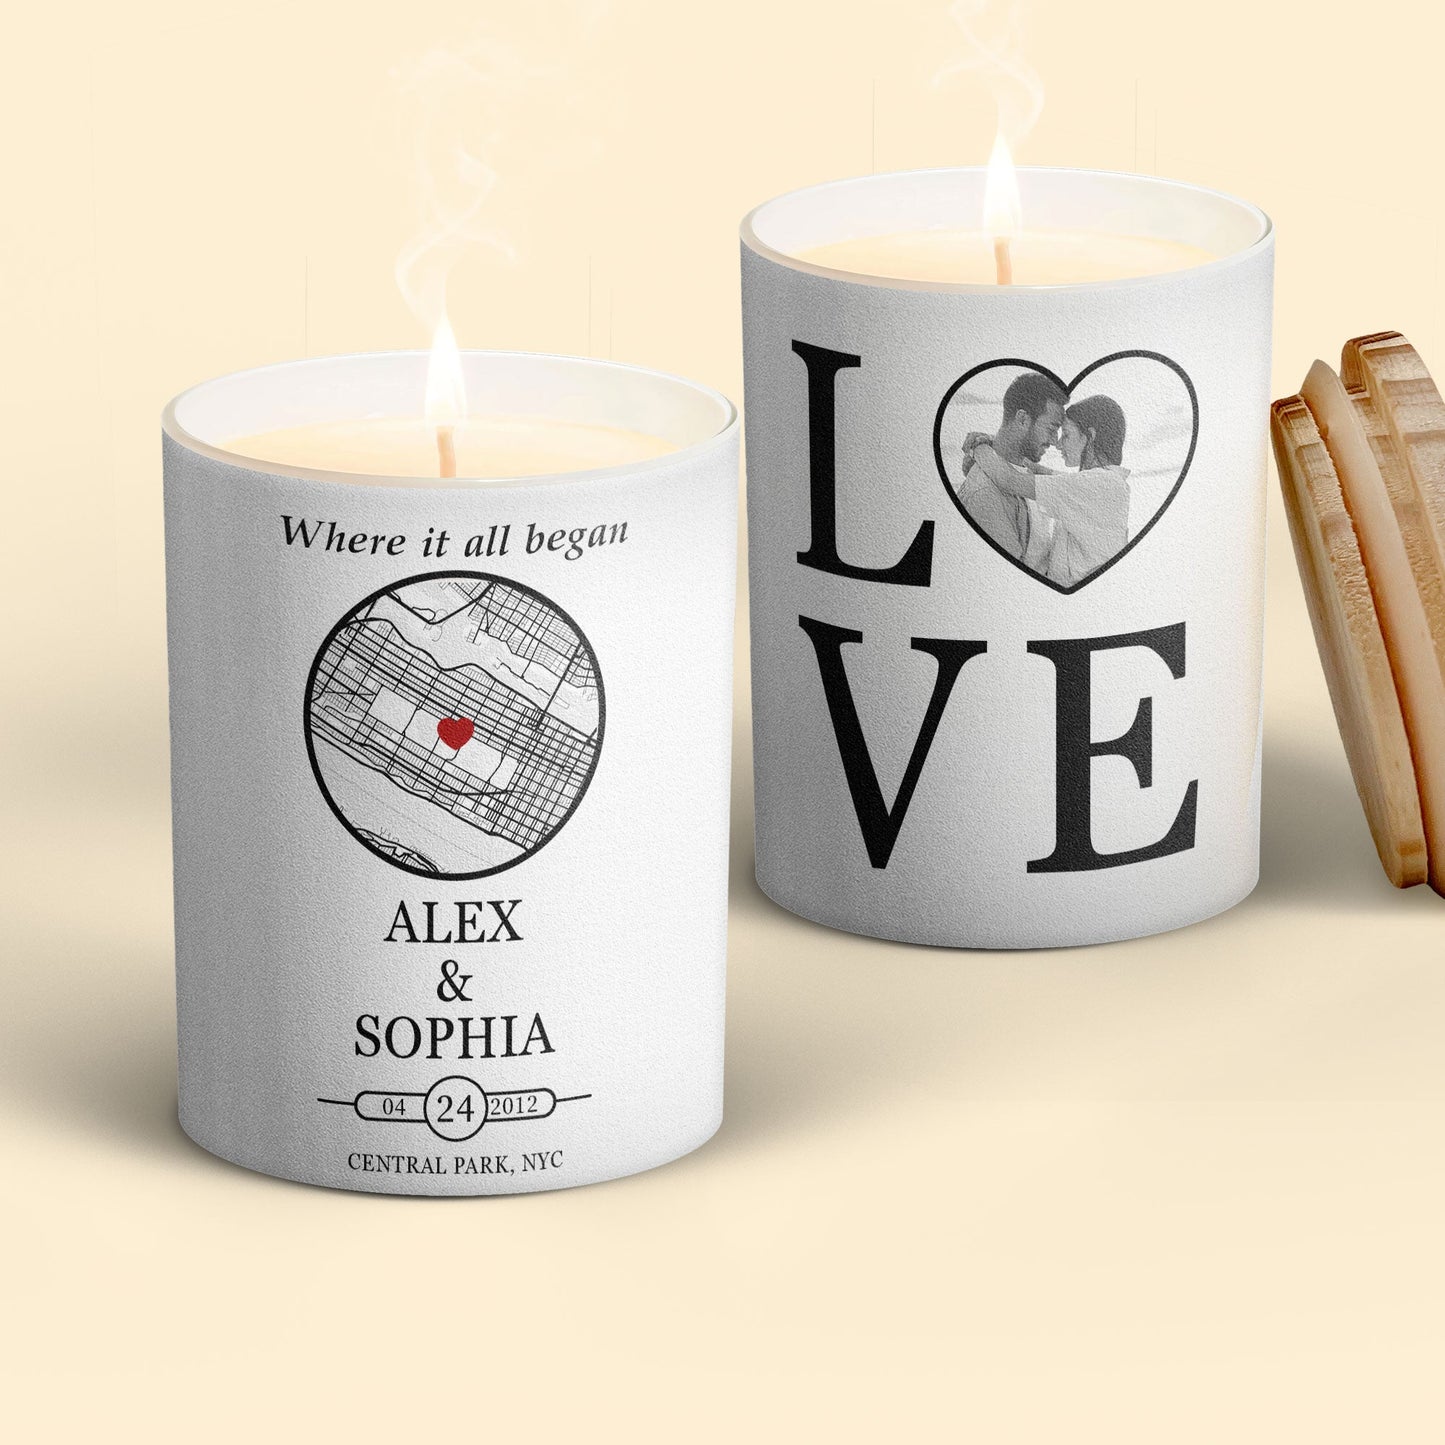 Where It All Began Anniversary Gifts - Personalized Photo Candle